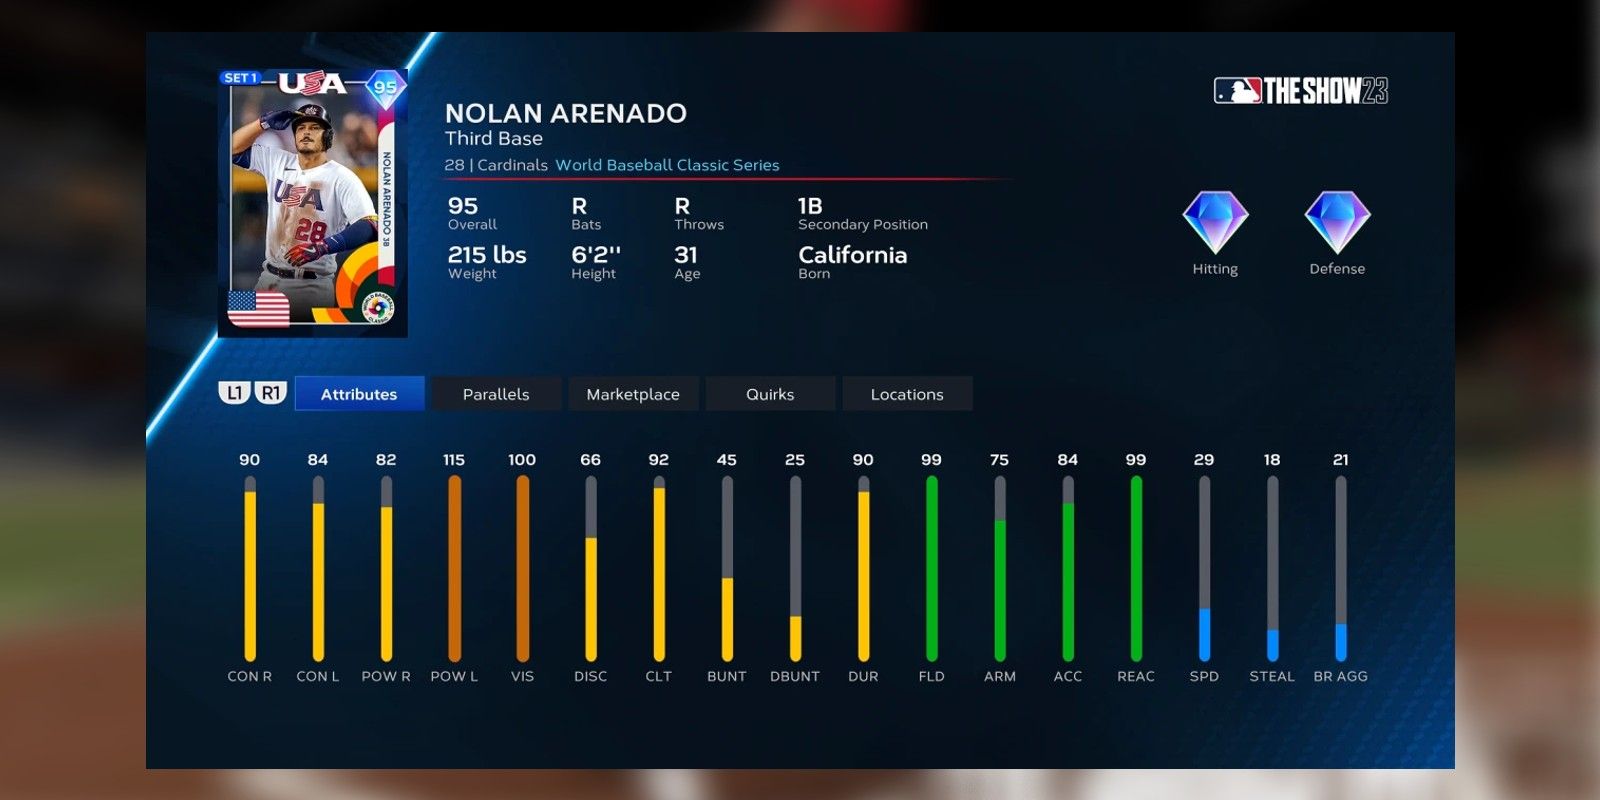 Nolan Arenado is one the best Lefty picks for Hitters in MLB The Show 23